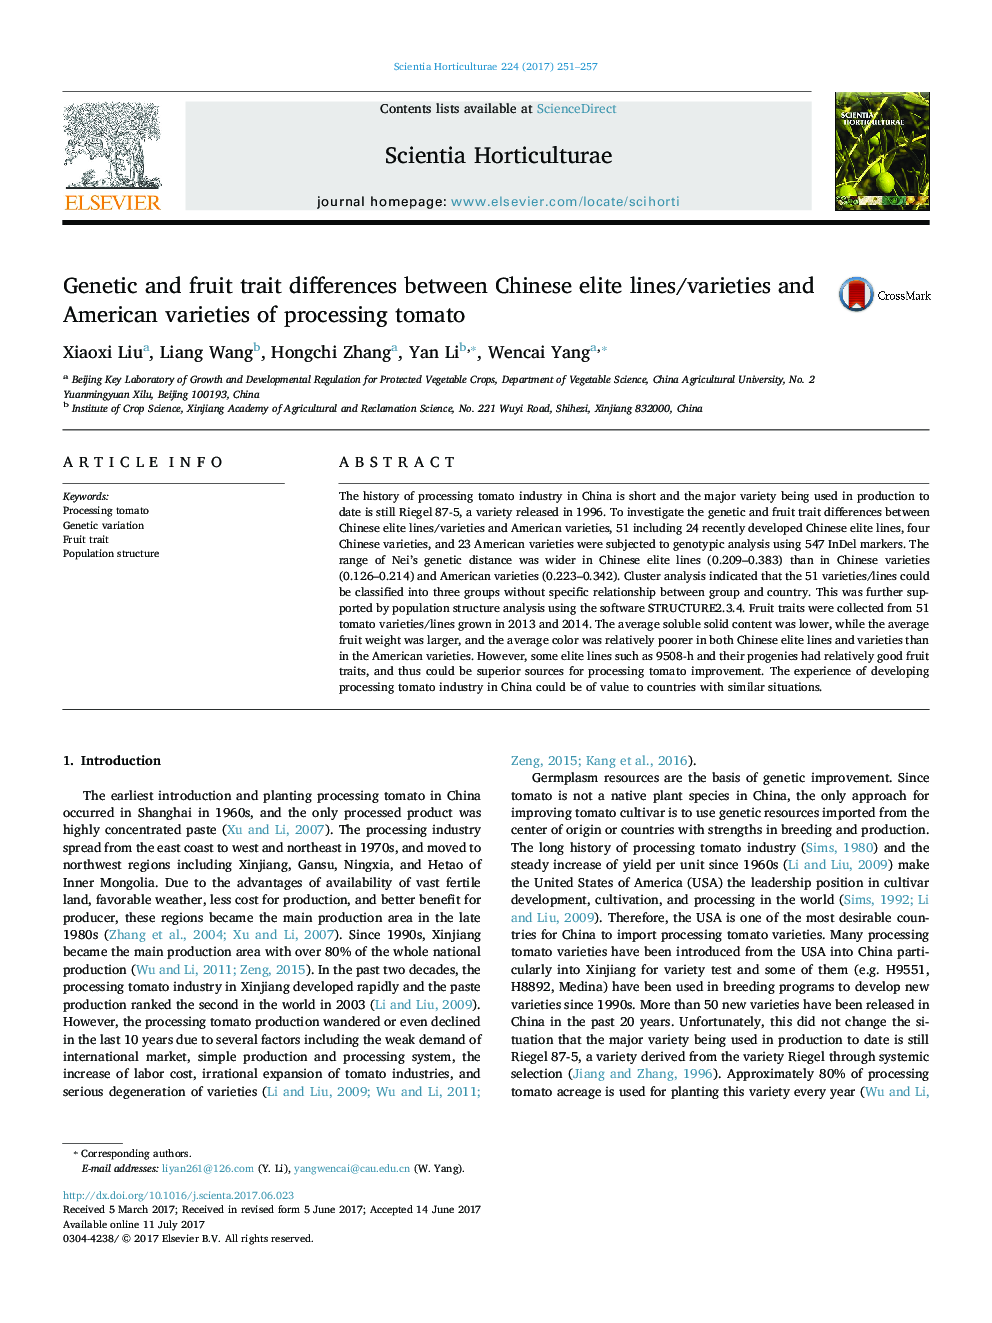 Genetic and fruit trait differences between Chinese elite lines/varieties and American varieties of processing tomato